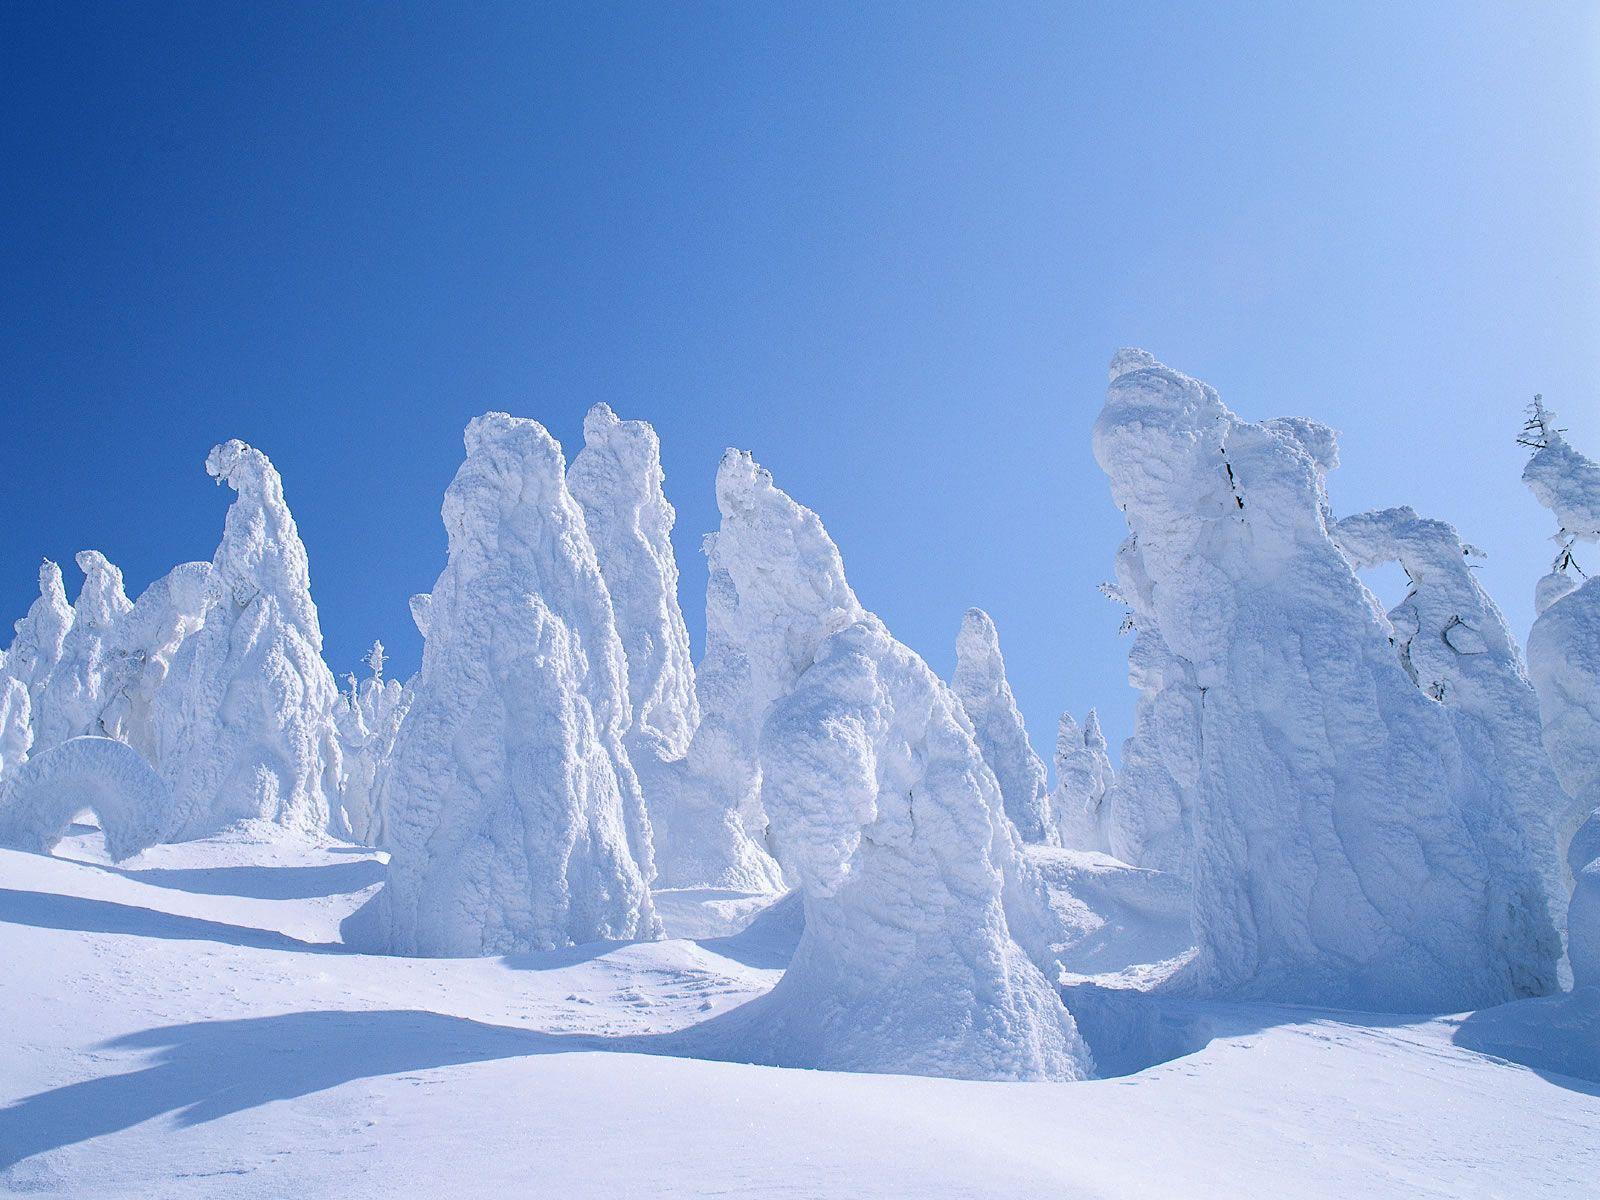 Snow Eallpapers HD Cool 7 HD Wallpaper. Hdimges